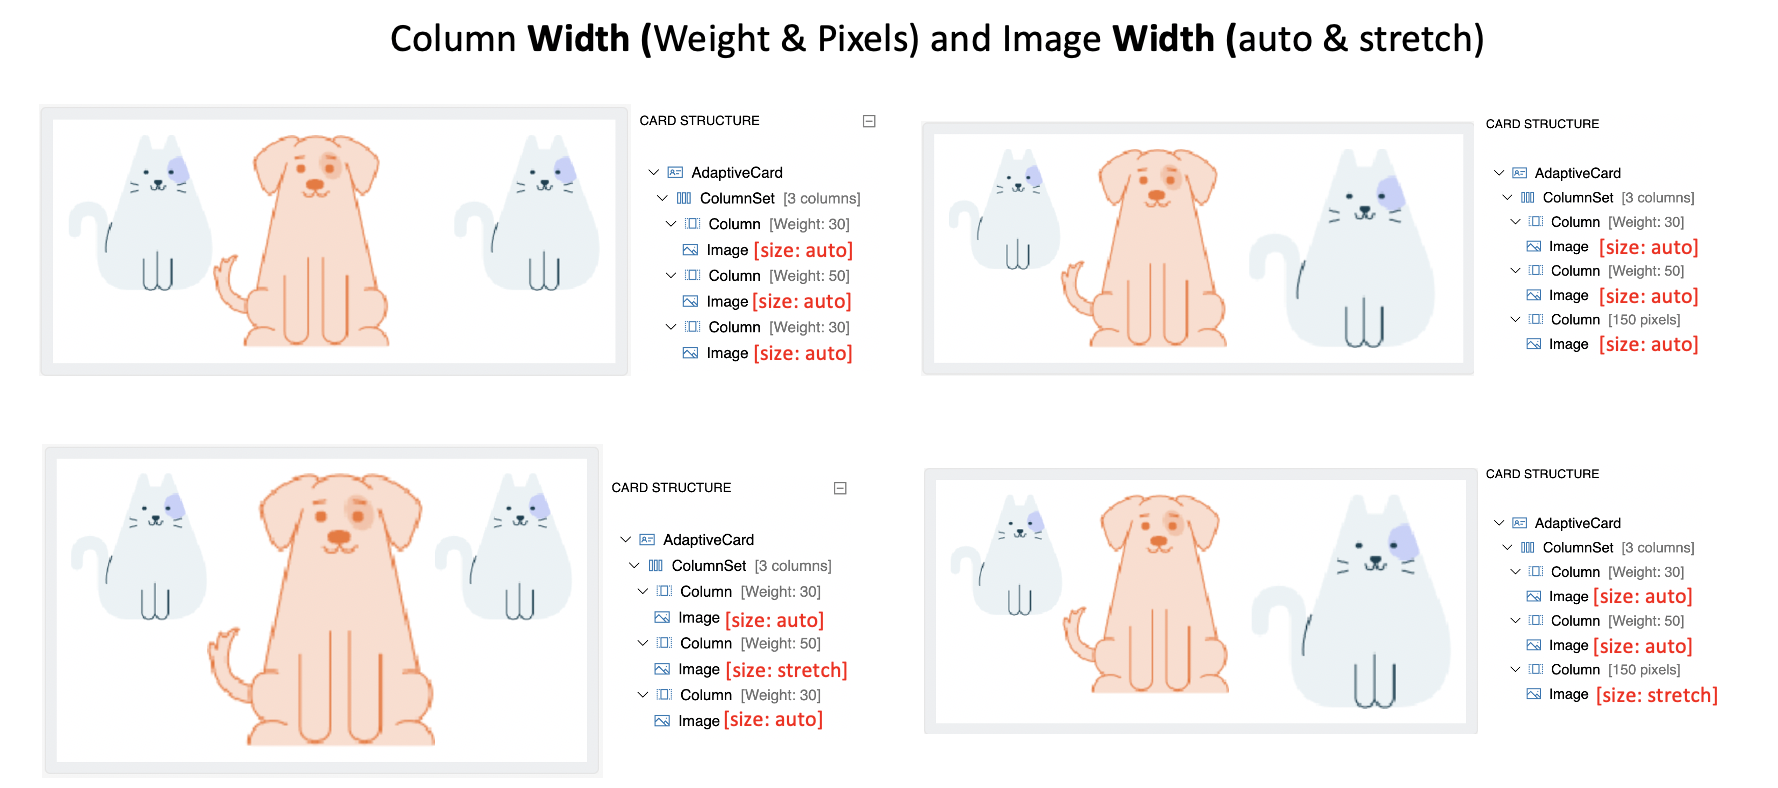 Column width weighted and image size combination